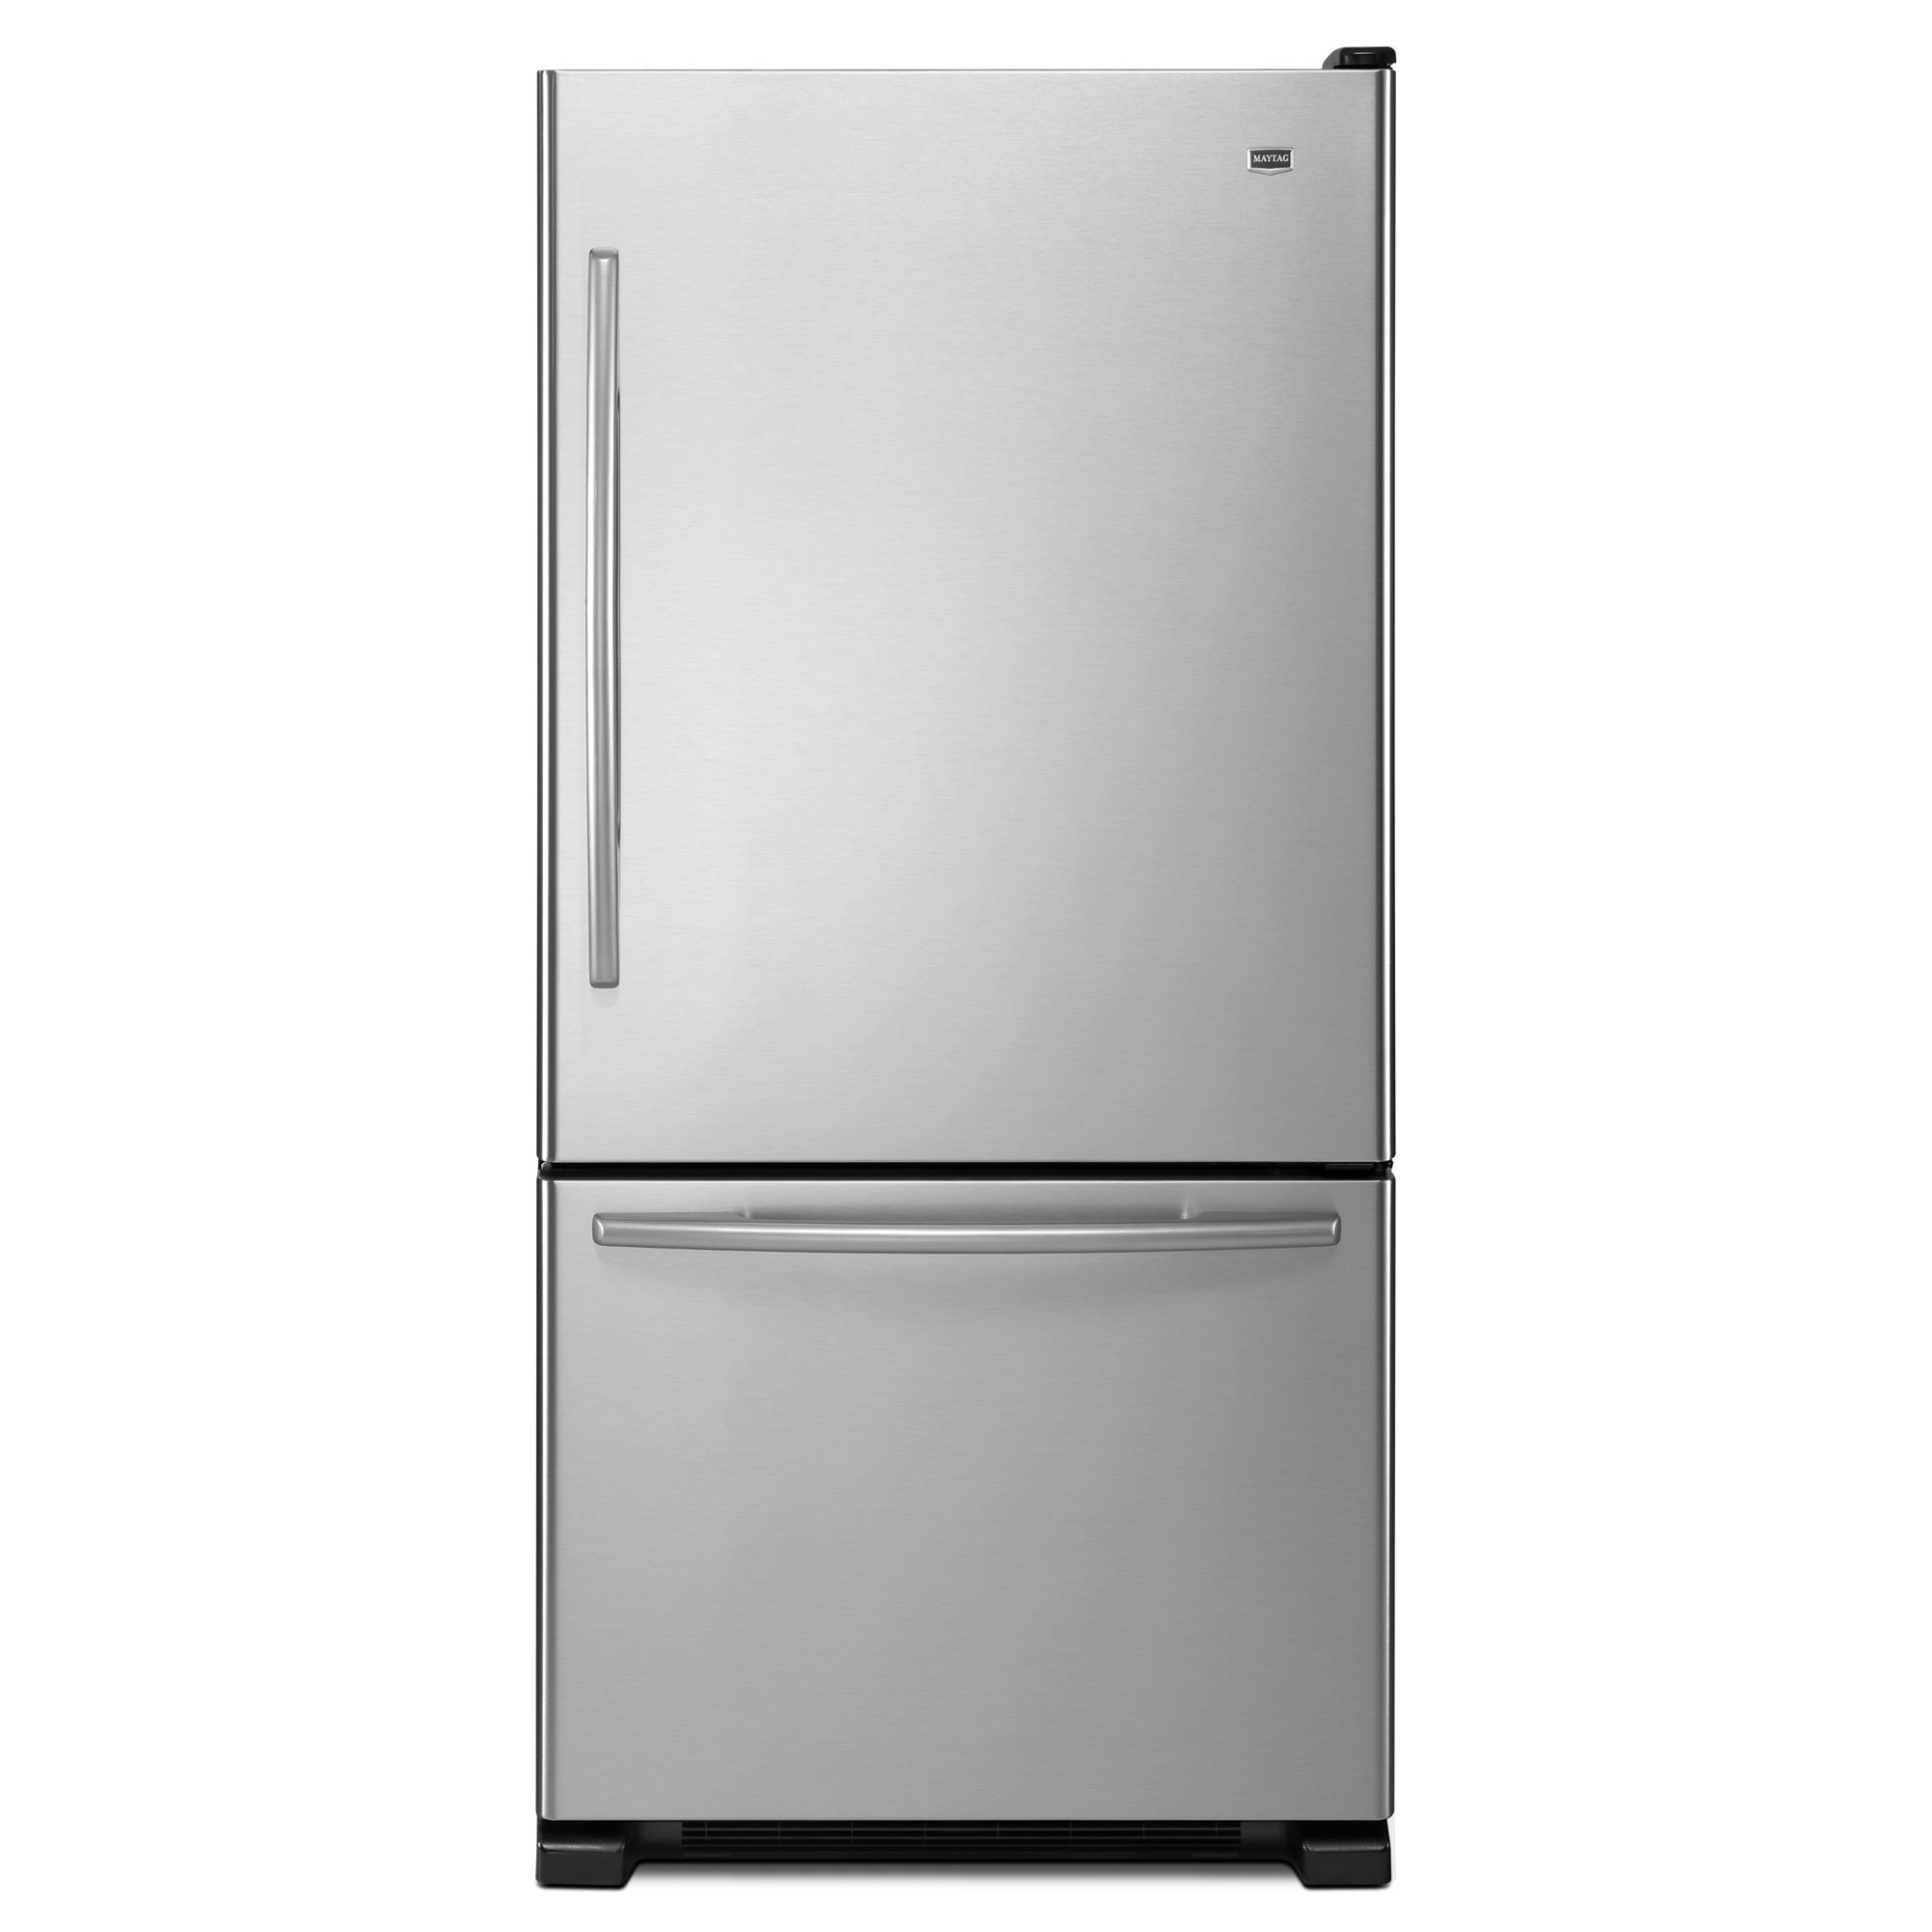 How do you fix the handle on the bottom freezer of a Maytag refrigerator?